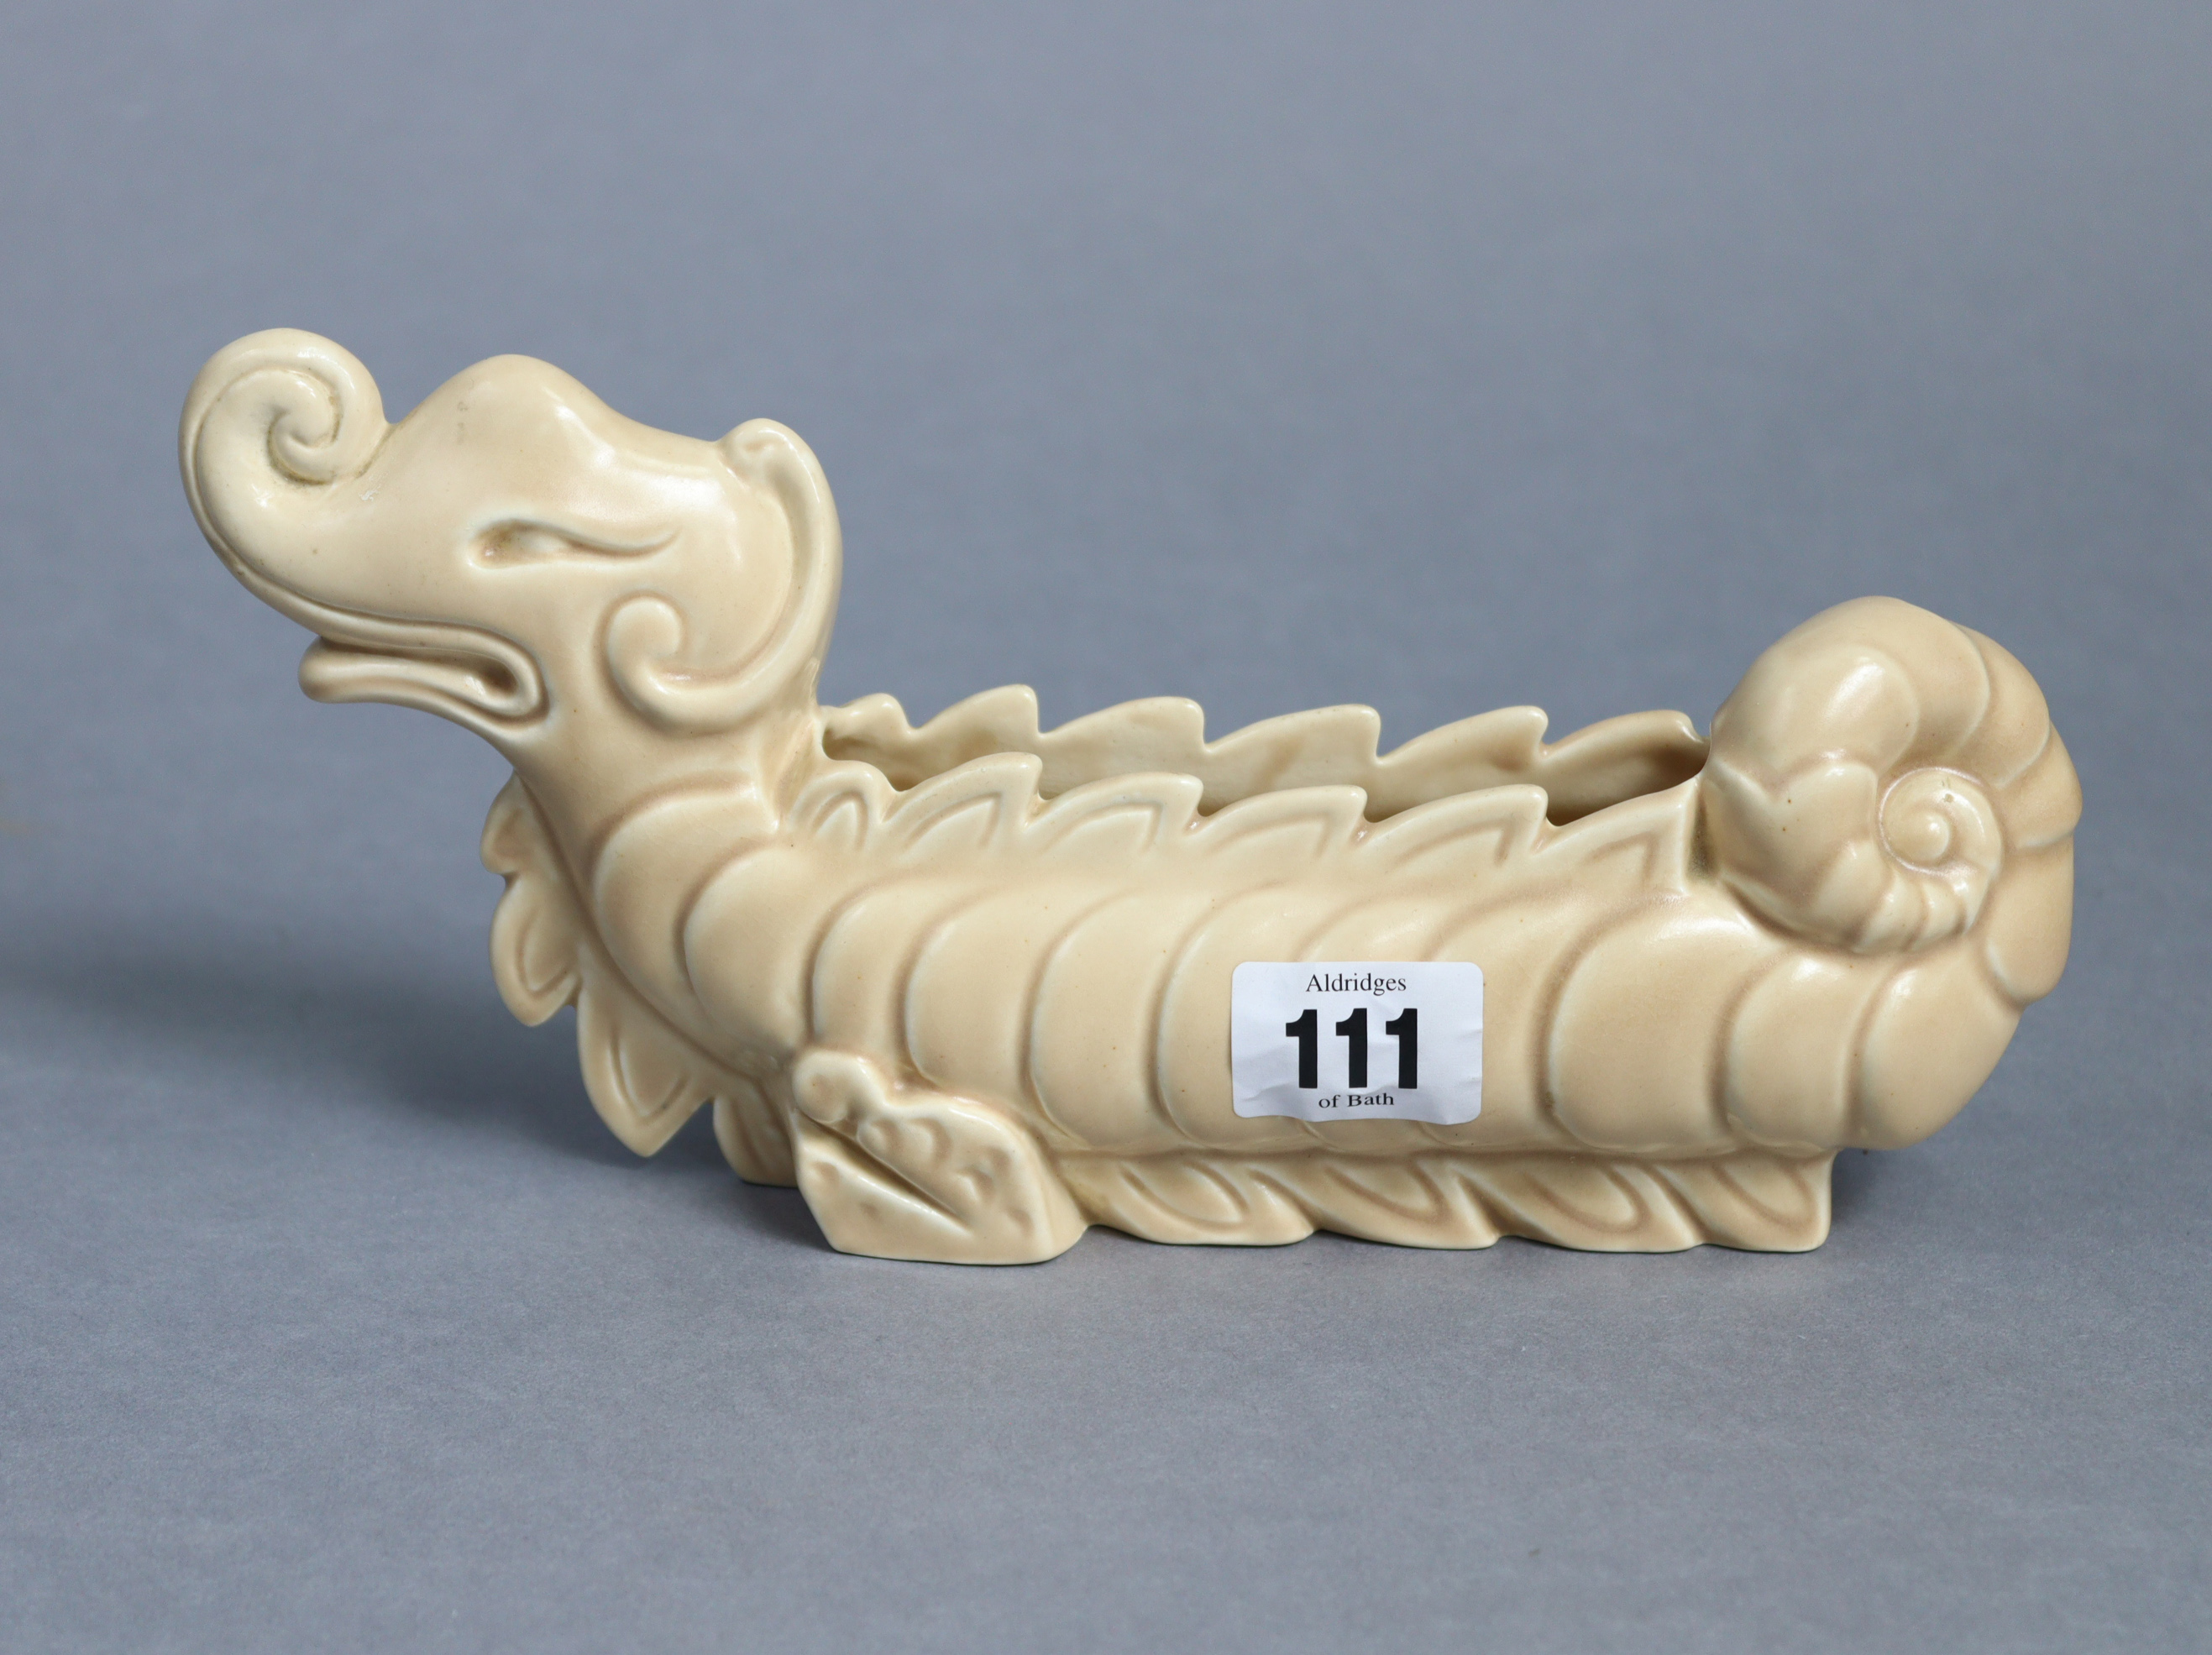 A Clarice Cliff pottery fawn glazed novelty flower trough in the form of a dragon (No. 827), 9½”